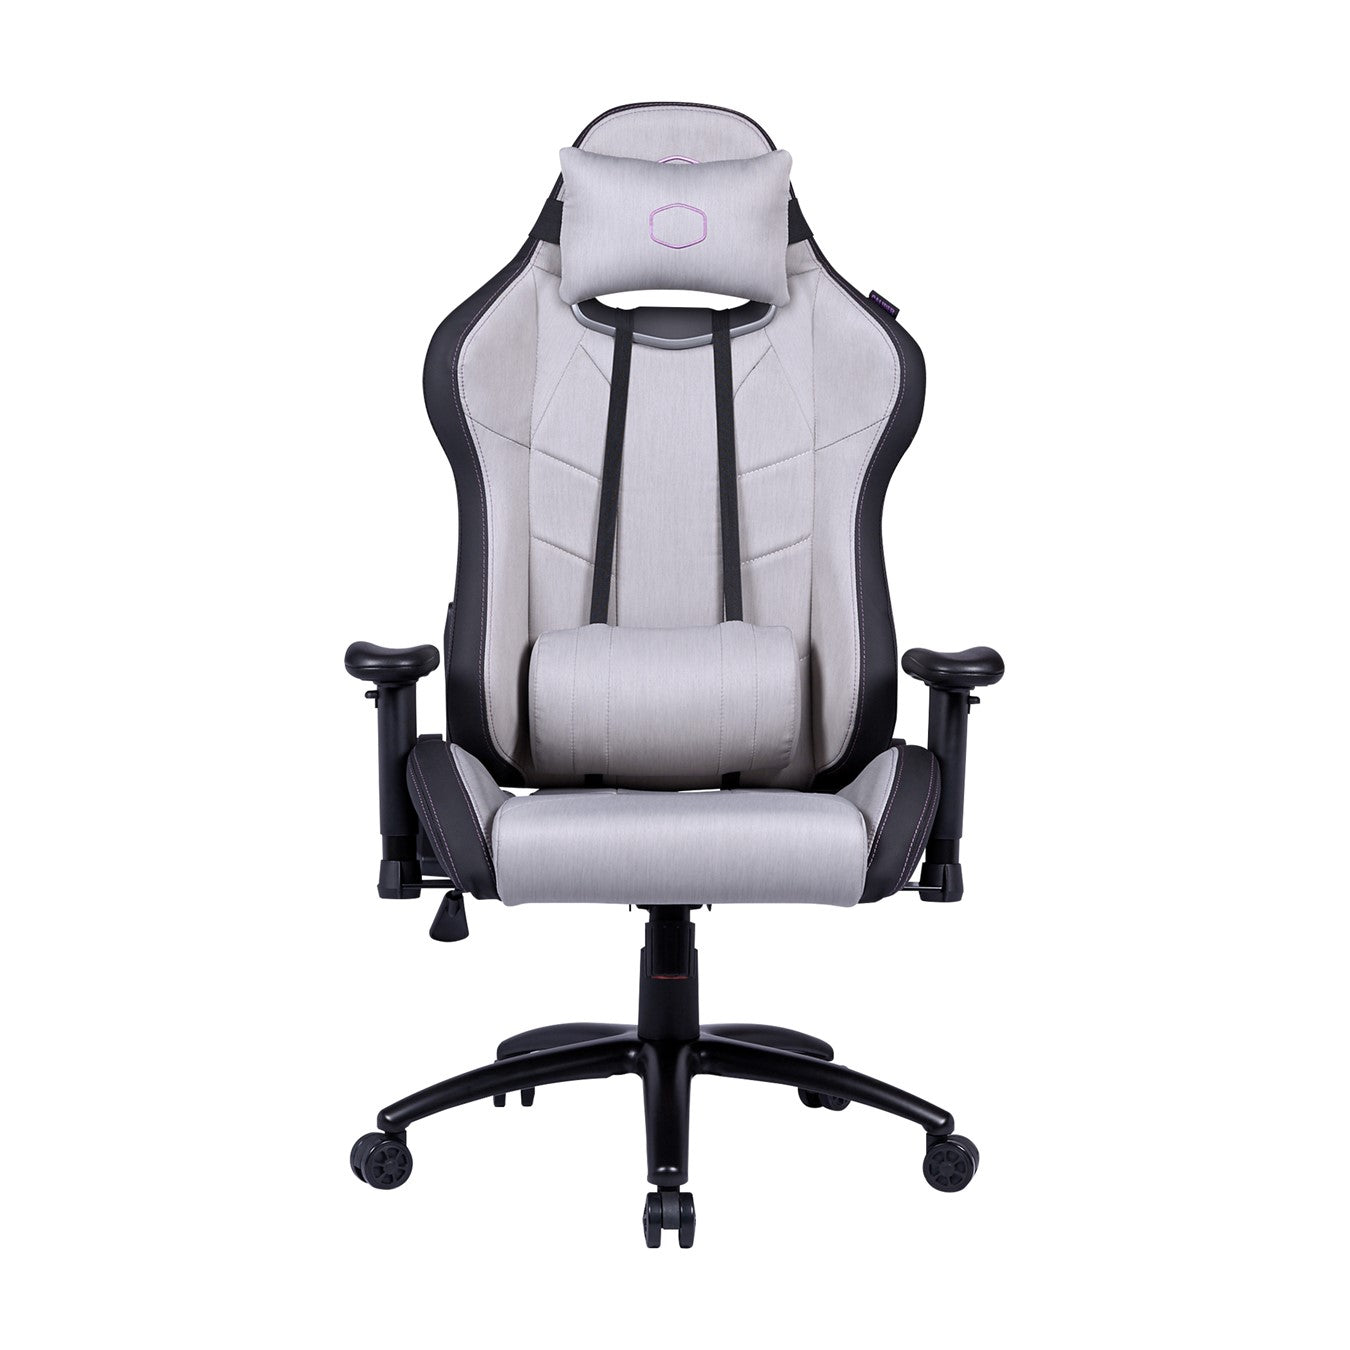 COOLER MASTER CALIBER R2 GAMING CHAIR COOL-IN EDITION, COOL-IN TECH, PREMIUM COMFORT&STYLE